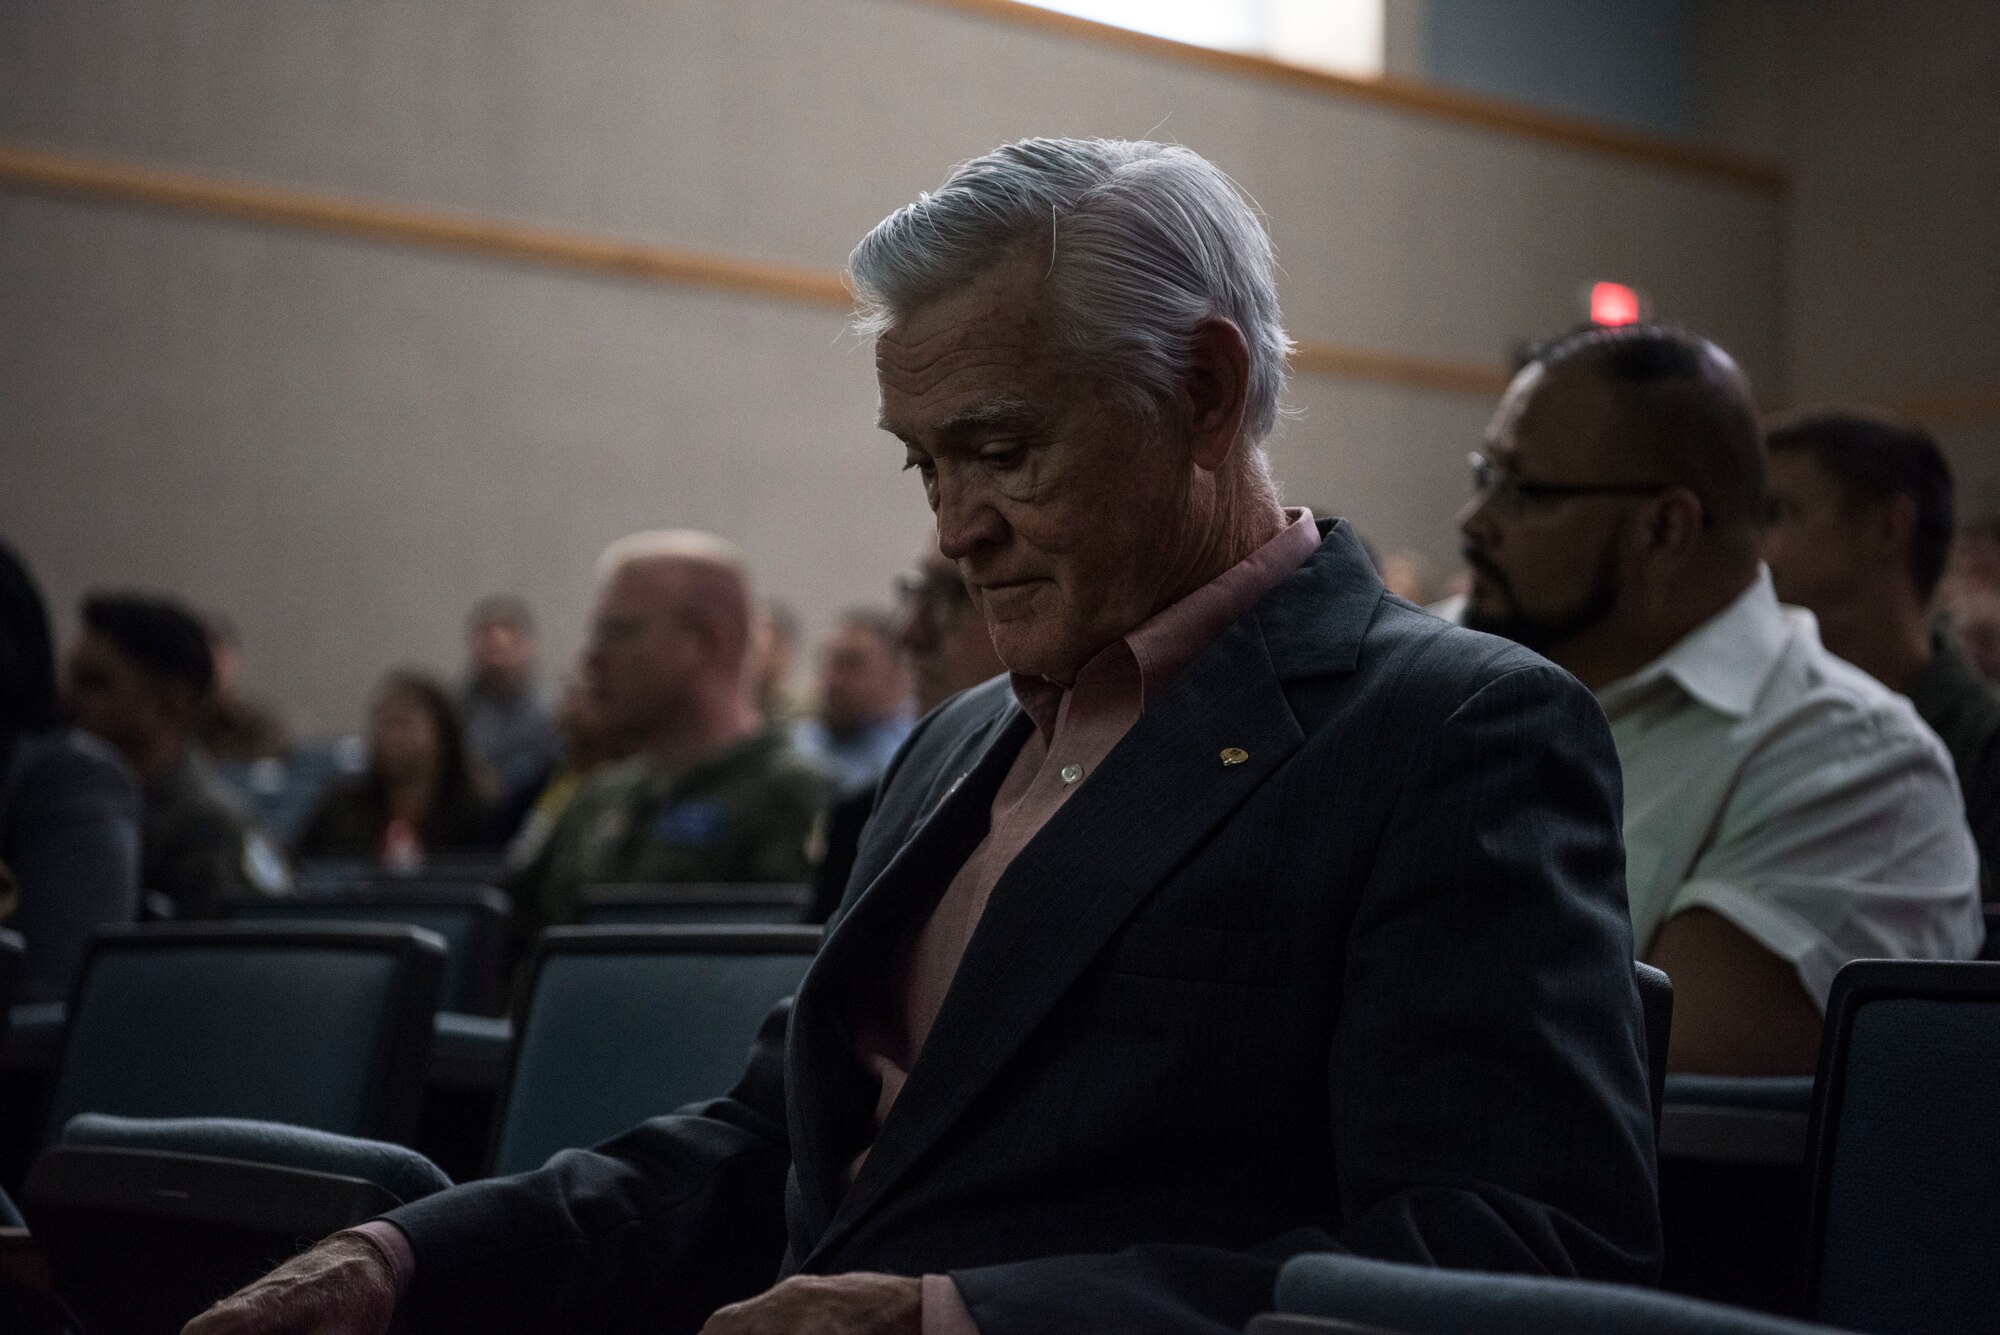 U.S. Air Force retired Lt. Col. Barry Bridger, former Prisoner of War, prepares to present at Laughlin Air Force Base, Texas, Oct. 23, 2019. Bridger spoke to members of Team XL about his time as a POW in the infamous Hanoi Hilton. (U.S. Air Force photo by Senior Airman Marco A. Gomez)